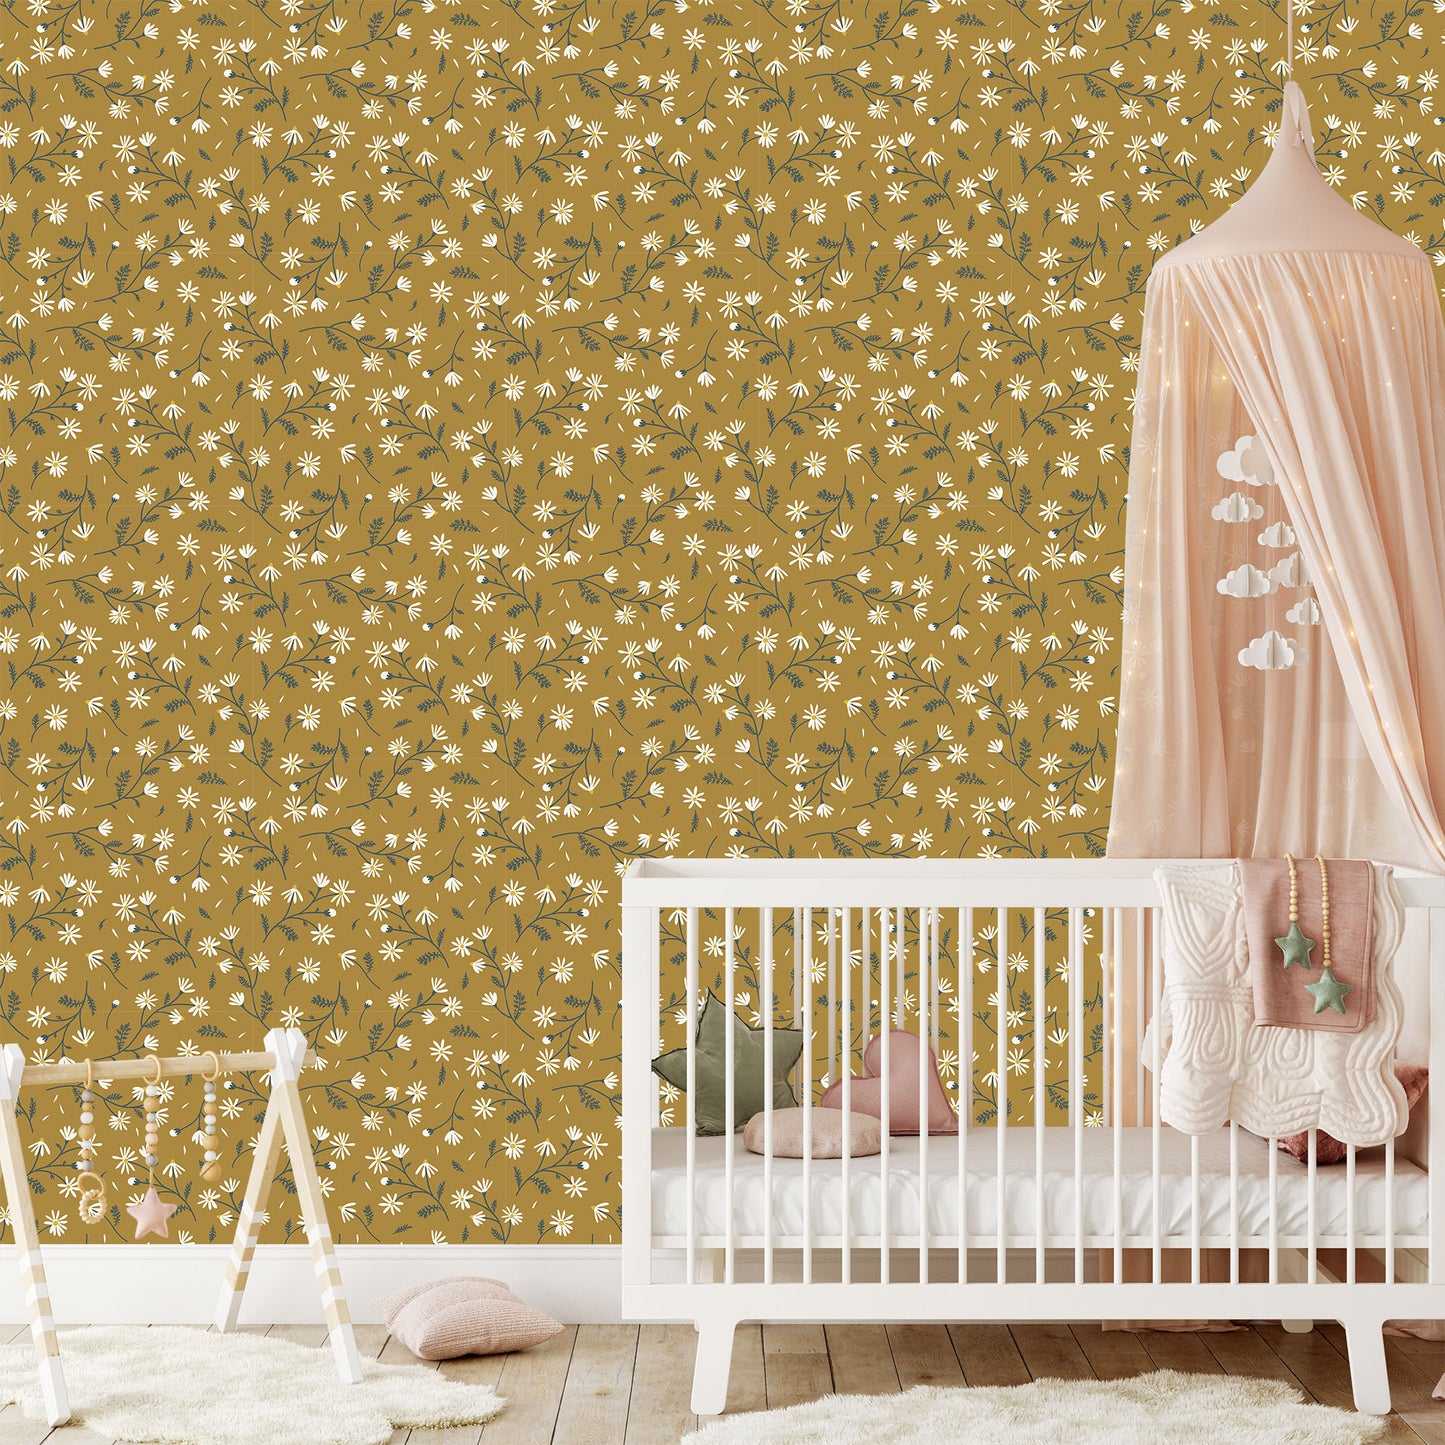 White and green on yellow/gold background easy to install and remove peel and stick custom wallpaper available in different lengths/sizes locally created and printed in Canada. Removable, washable, durable, commercial grade, customizable and water proof.